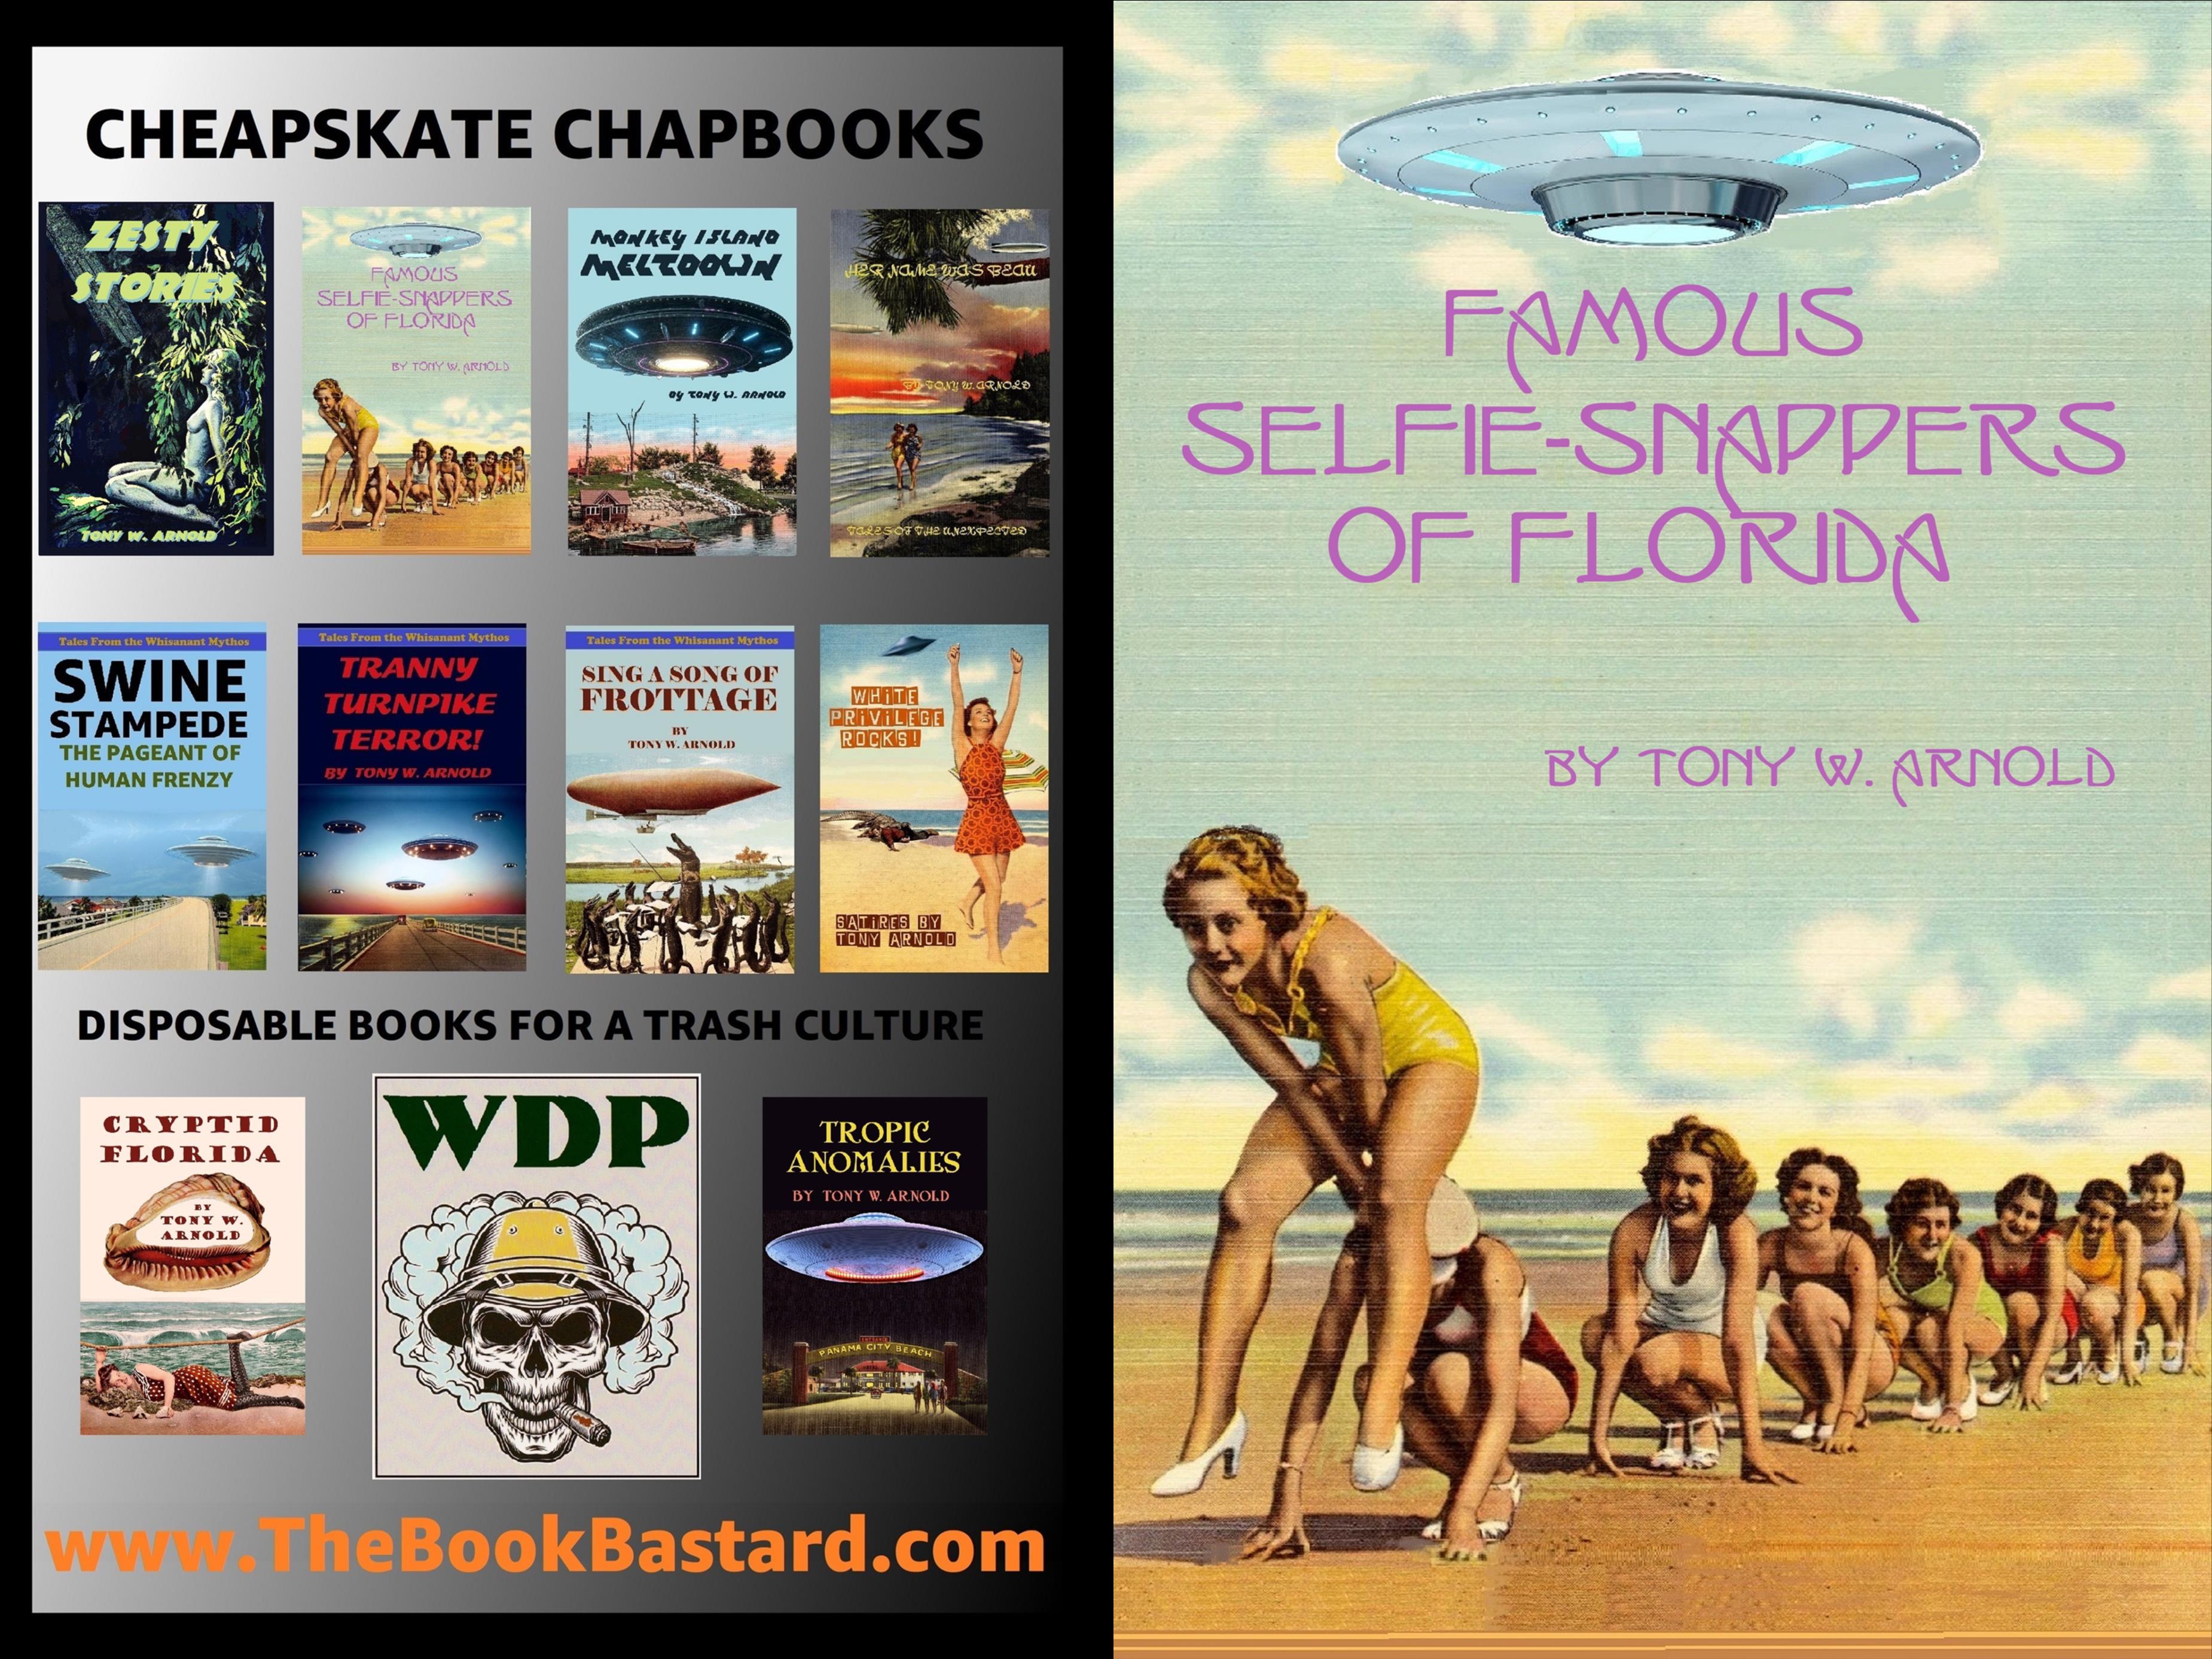 Famous Selfie-Snappers of Florida cover image